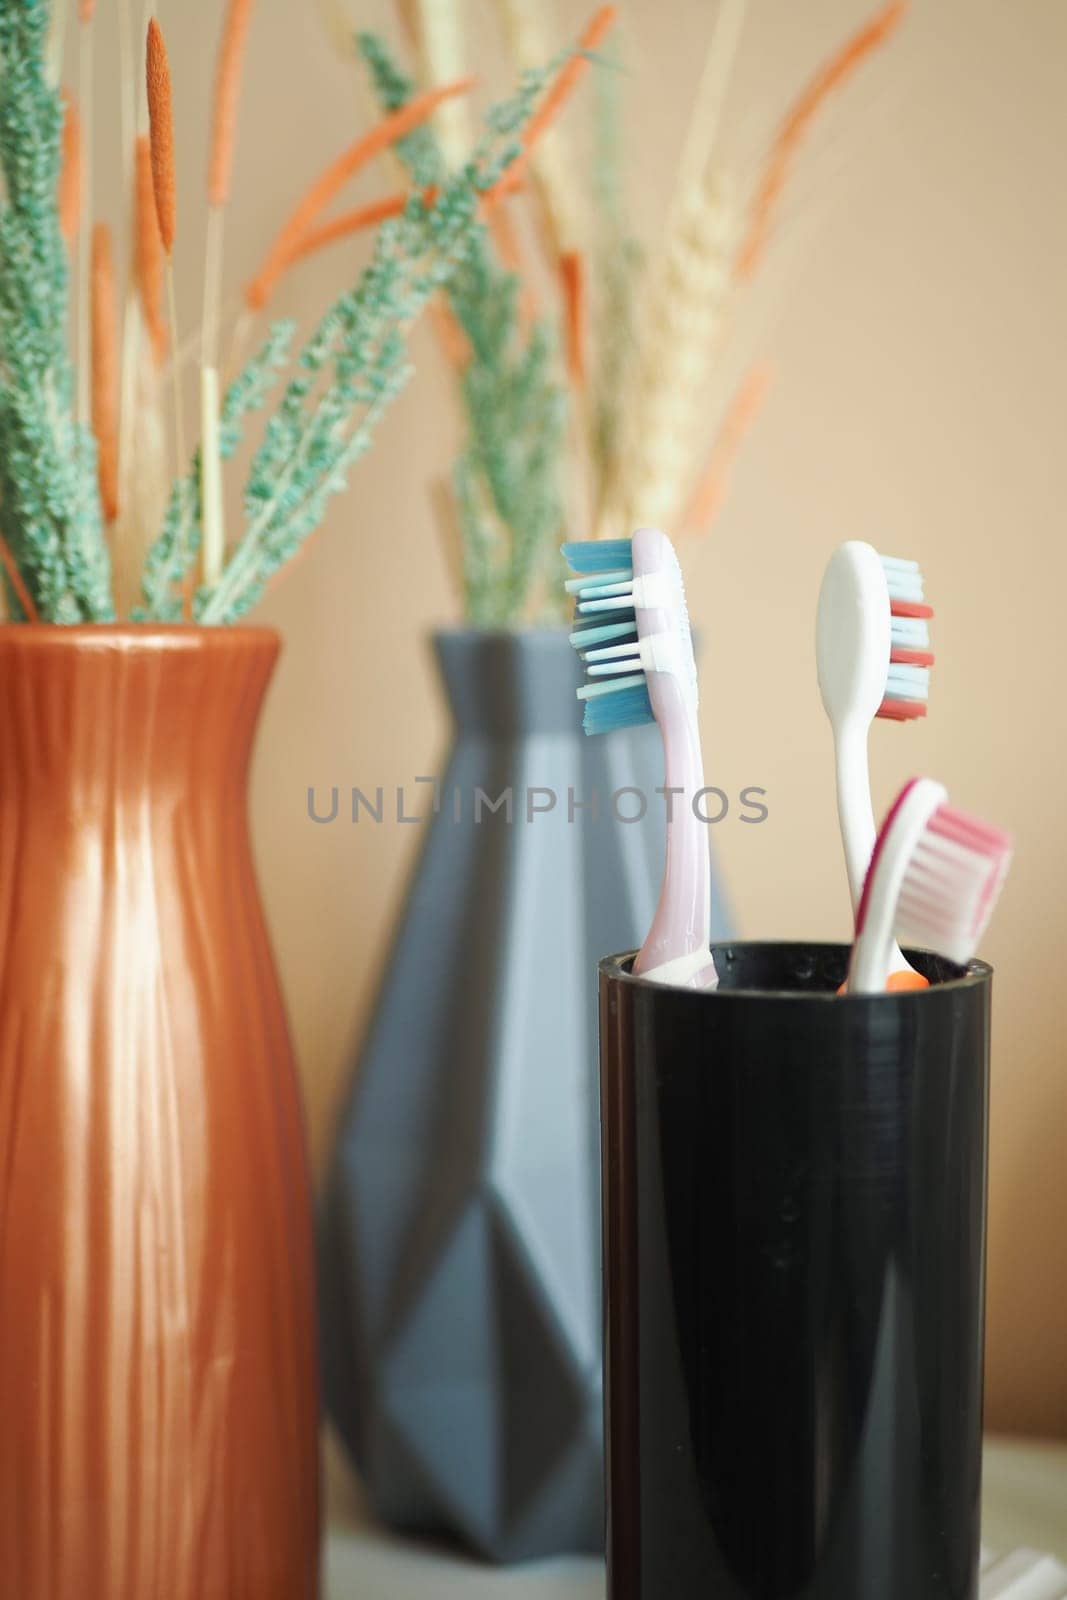 colorful toothbrushes in white mug against a wall .